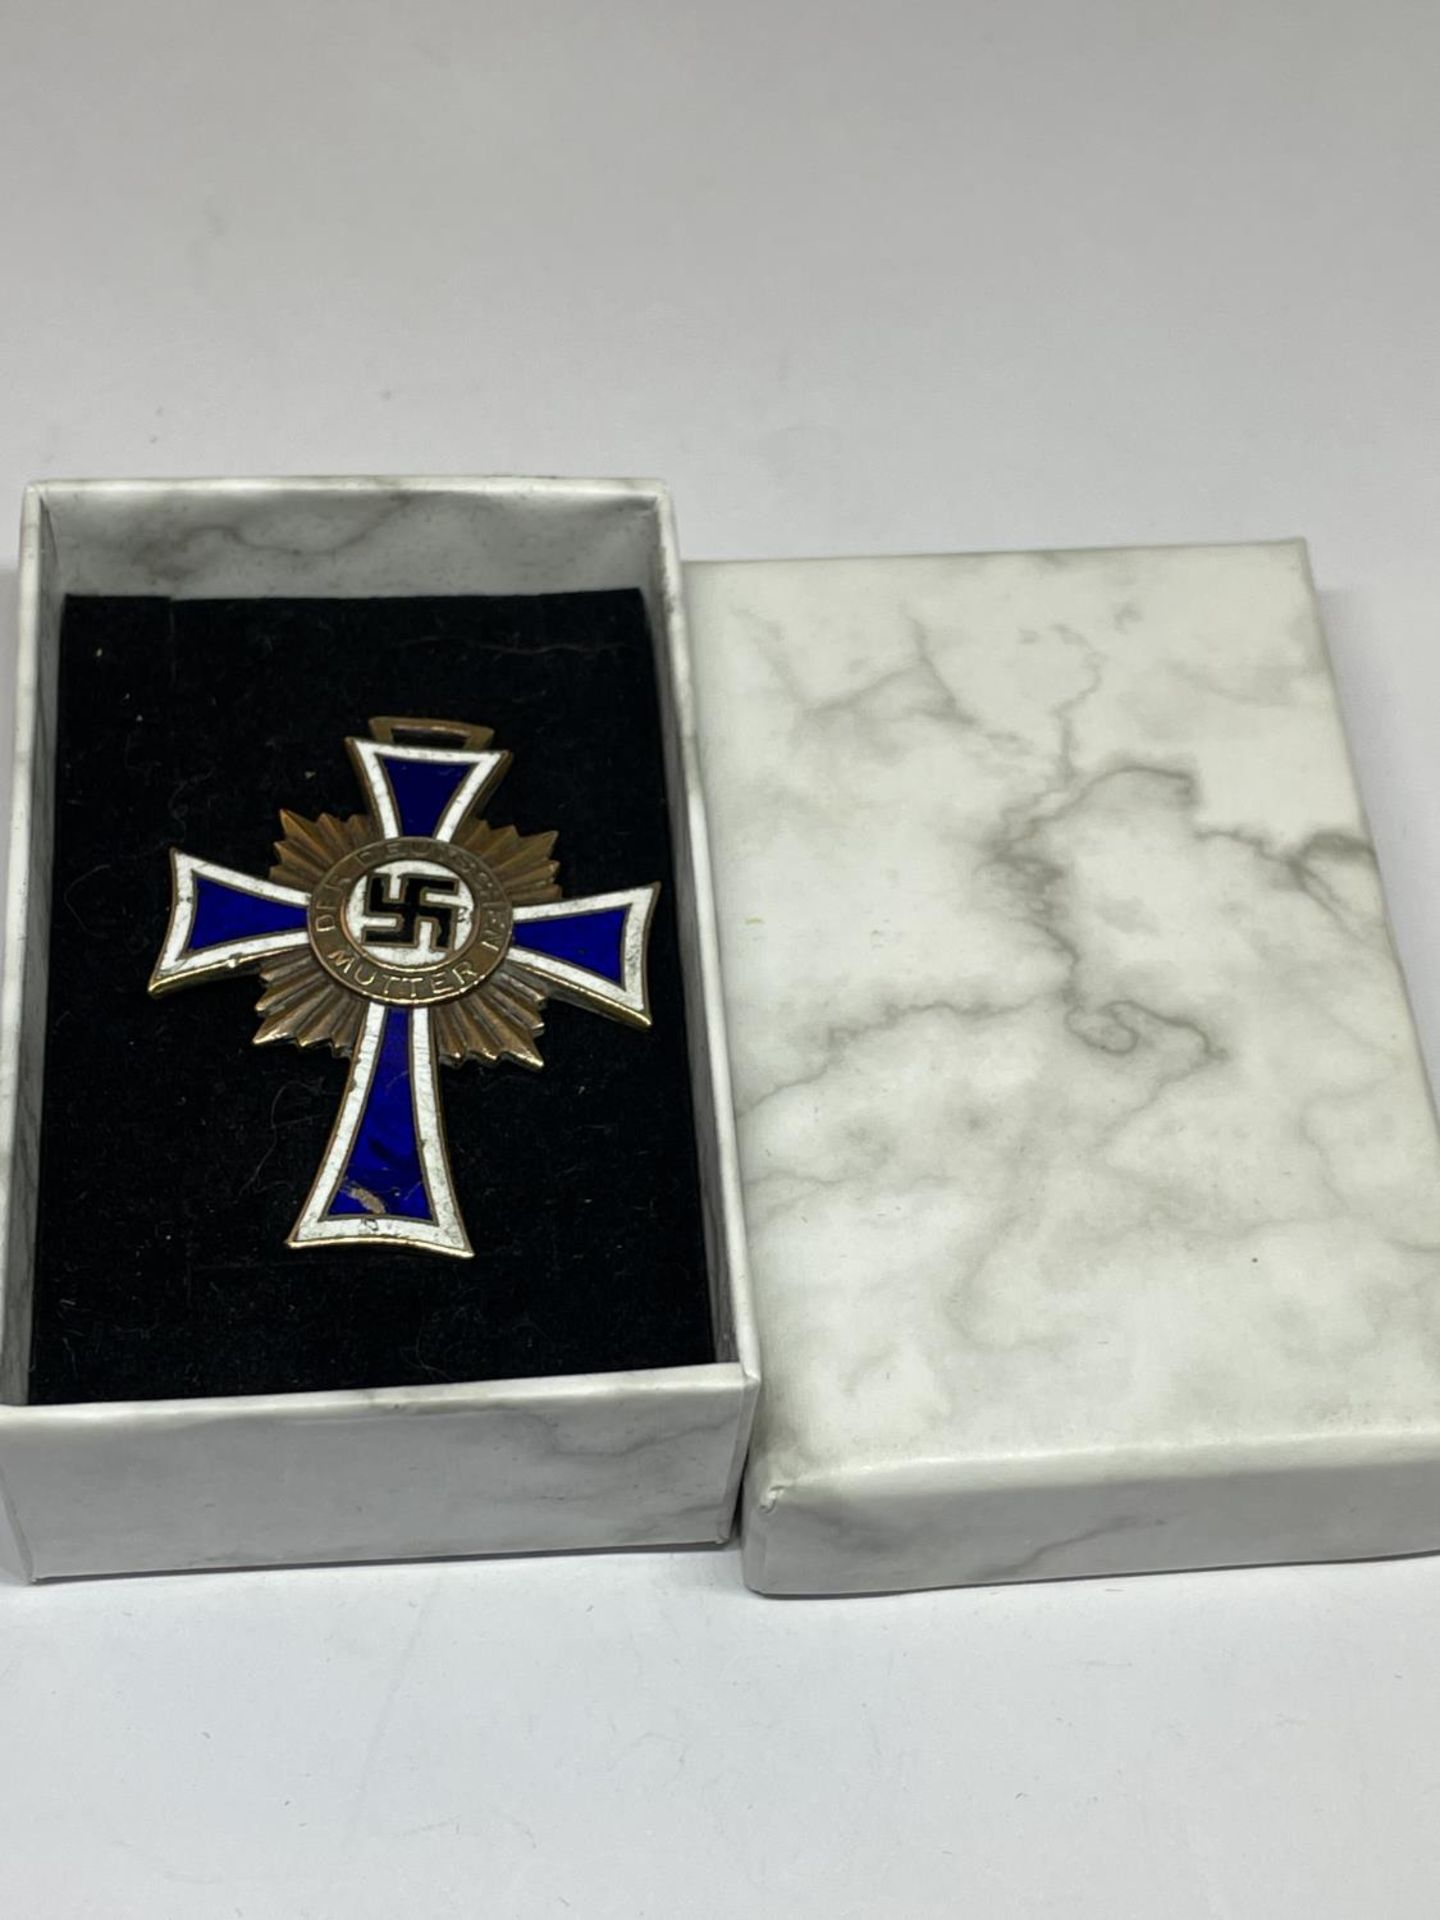 A GERMAN CROSS ENGRAVED IN A PRESENTATION BOX